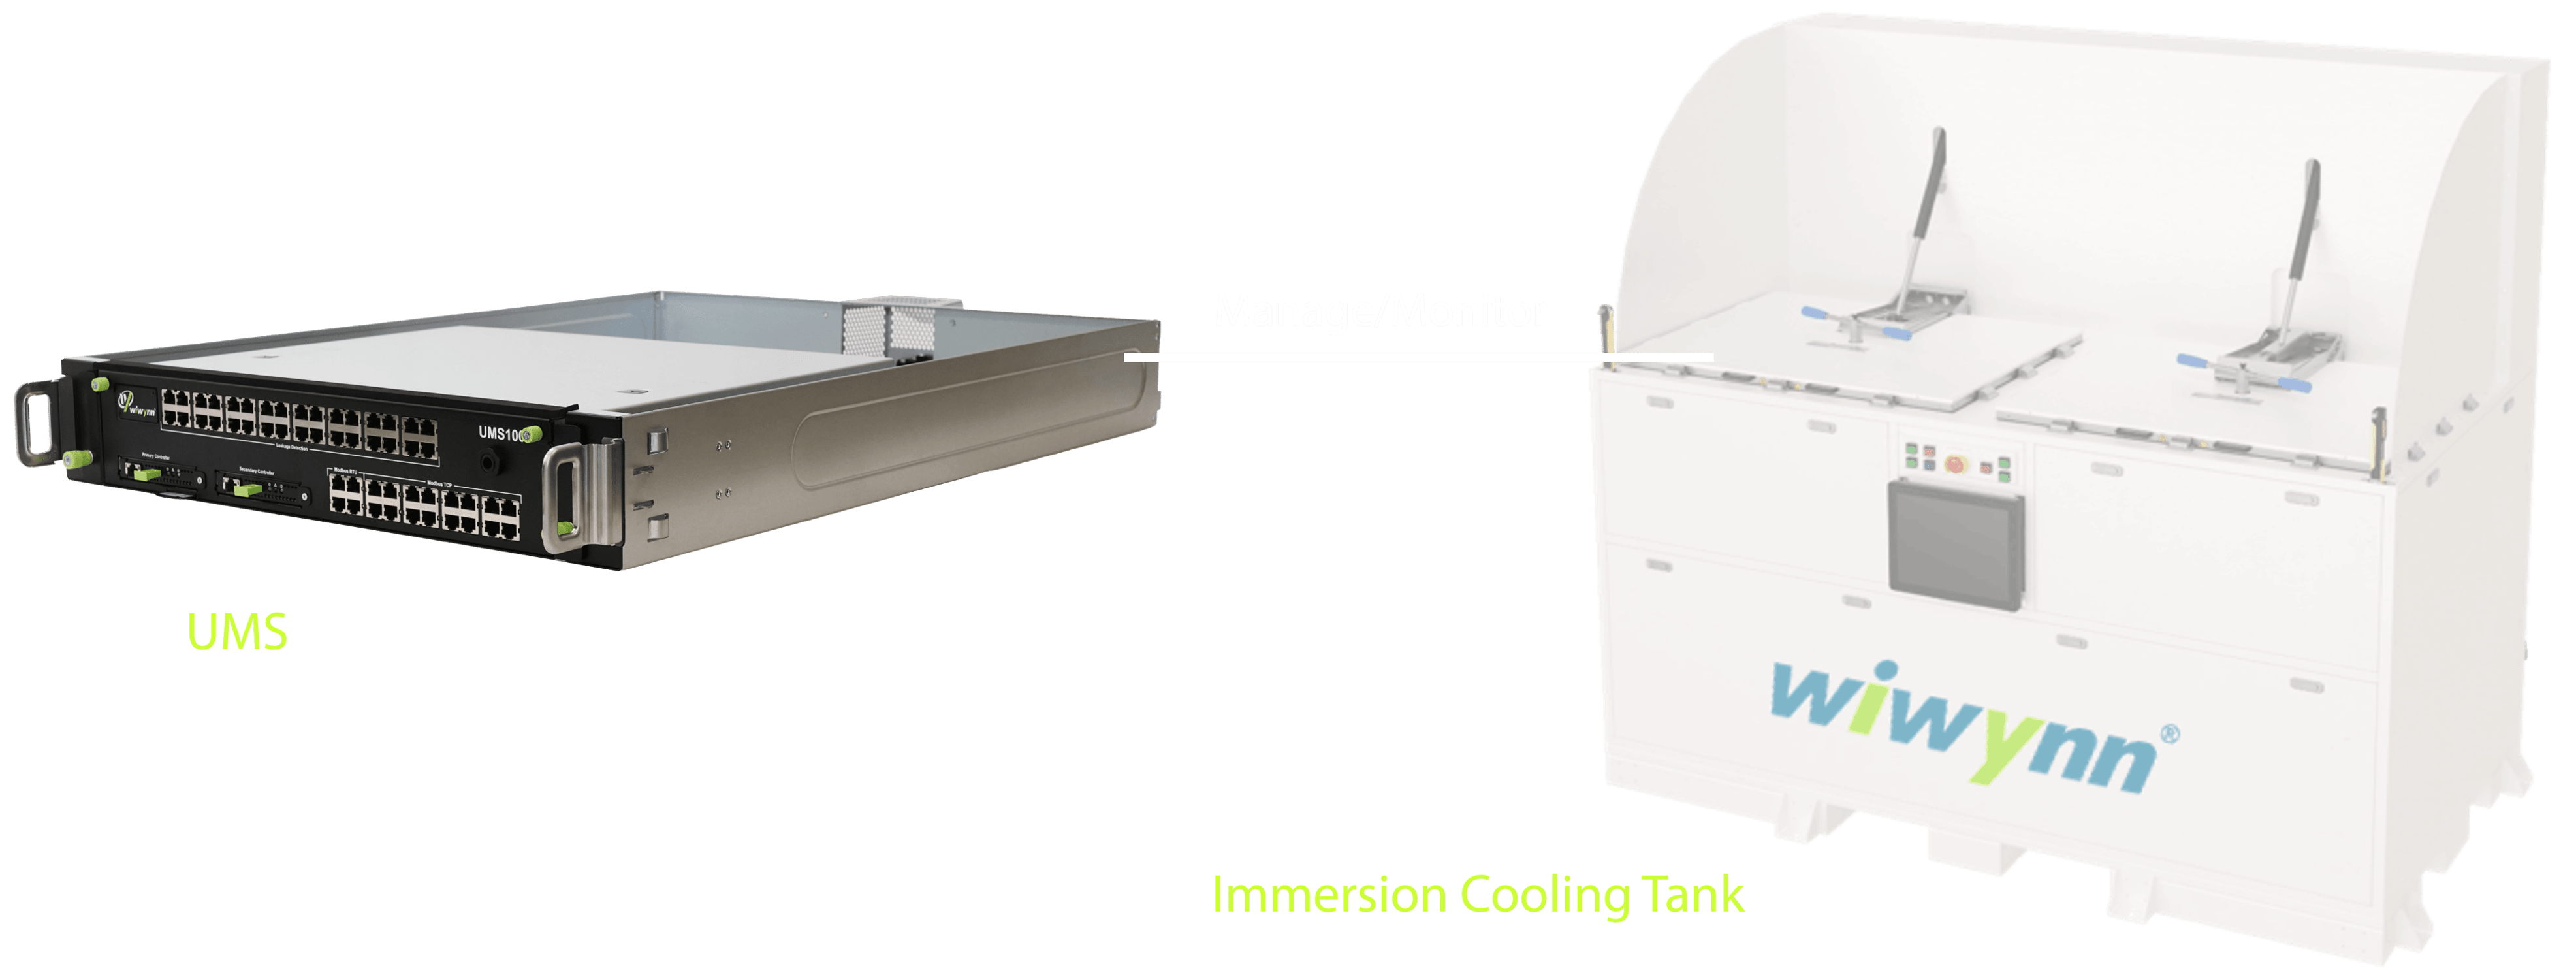 Immersion_cooling_tank_mgr